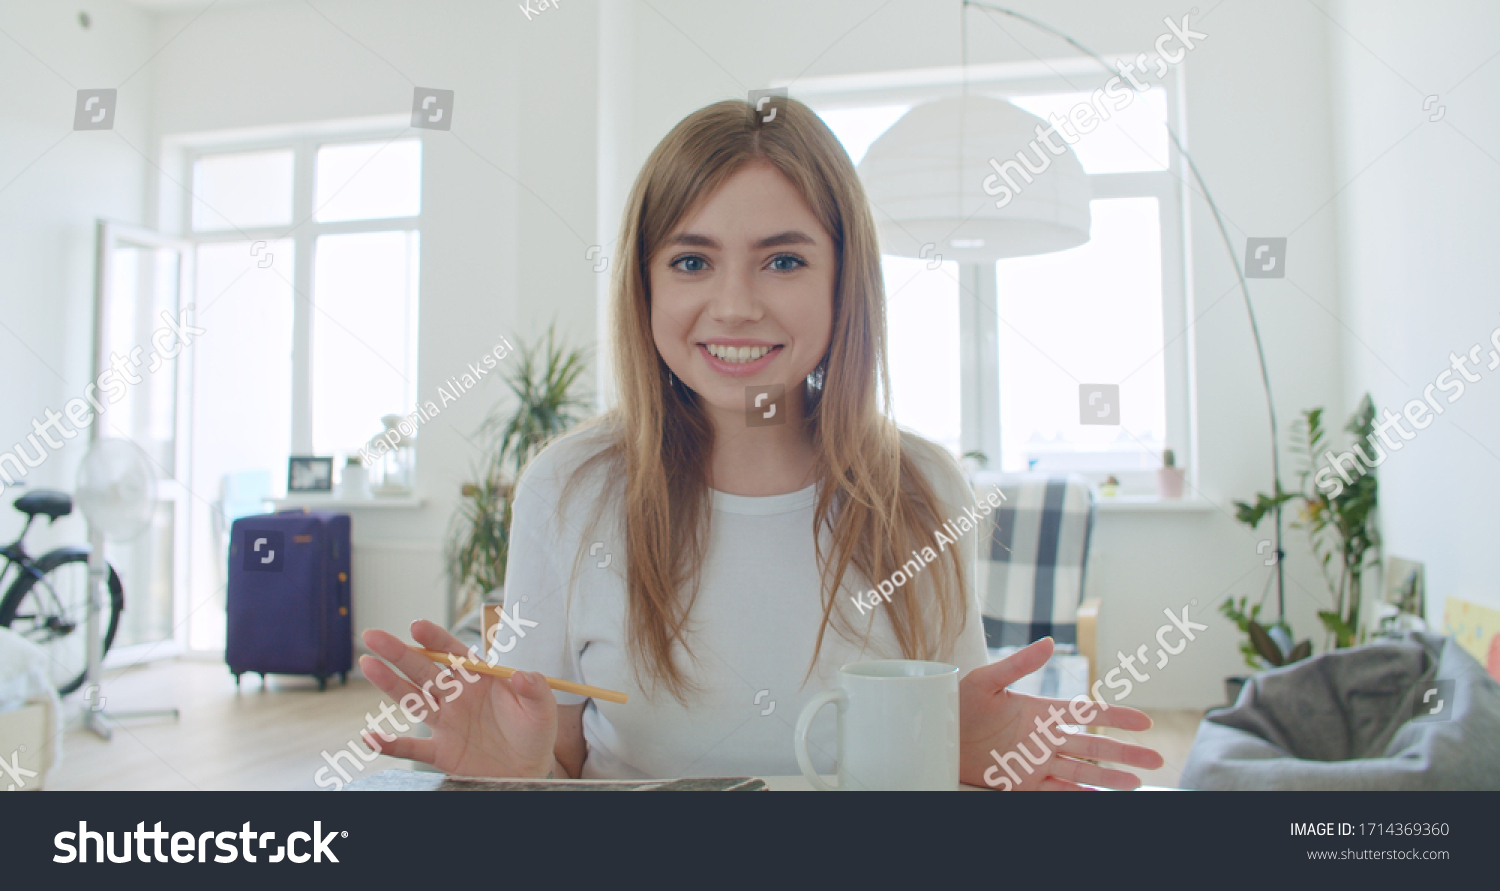 Smiling young woman blogger vlogger influencer working at home. Girl speaking looking at camera talking making videochat or conference call, Female record blog vlog #1714369360